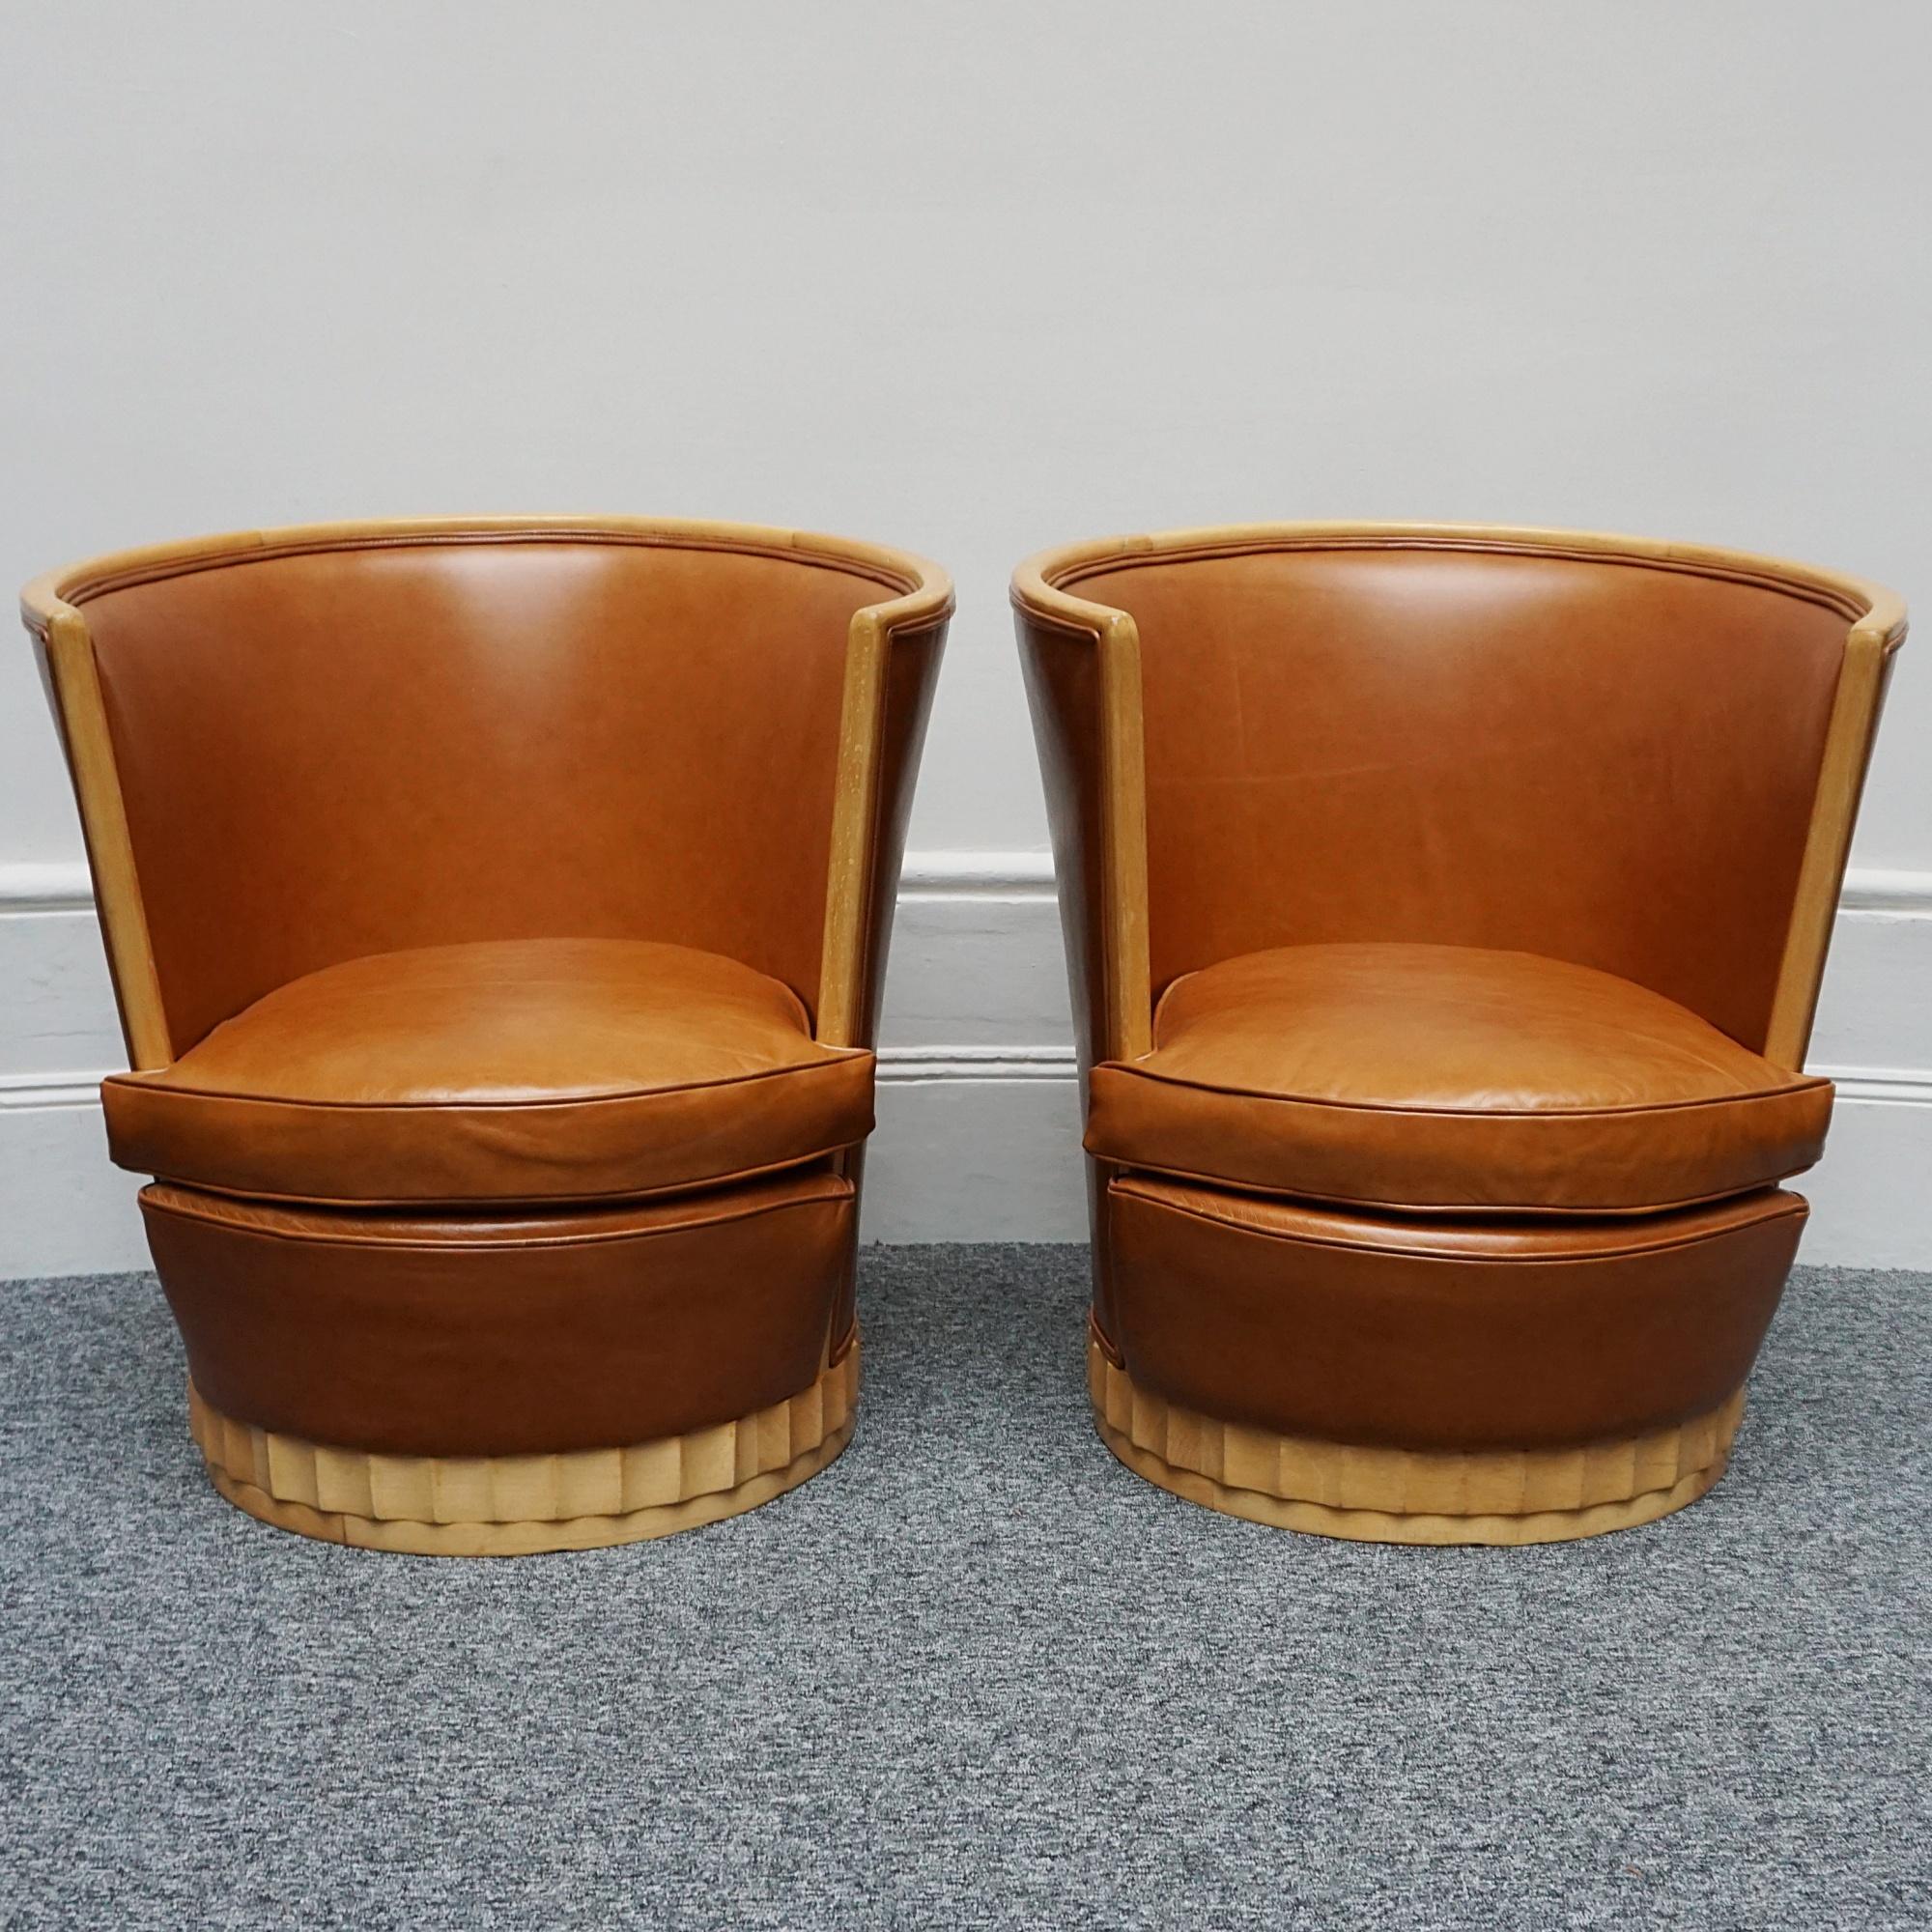 A pair of Art Deco tub chairs. Satin birch fluted base and frame with brown leather re-upholstery. 

Dimensions: H 79cm W 75cm D 75cm Seat H 39cm W 49cm D 69cm

Origin: French

All of our furniture is extensively polished and restored where